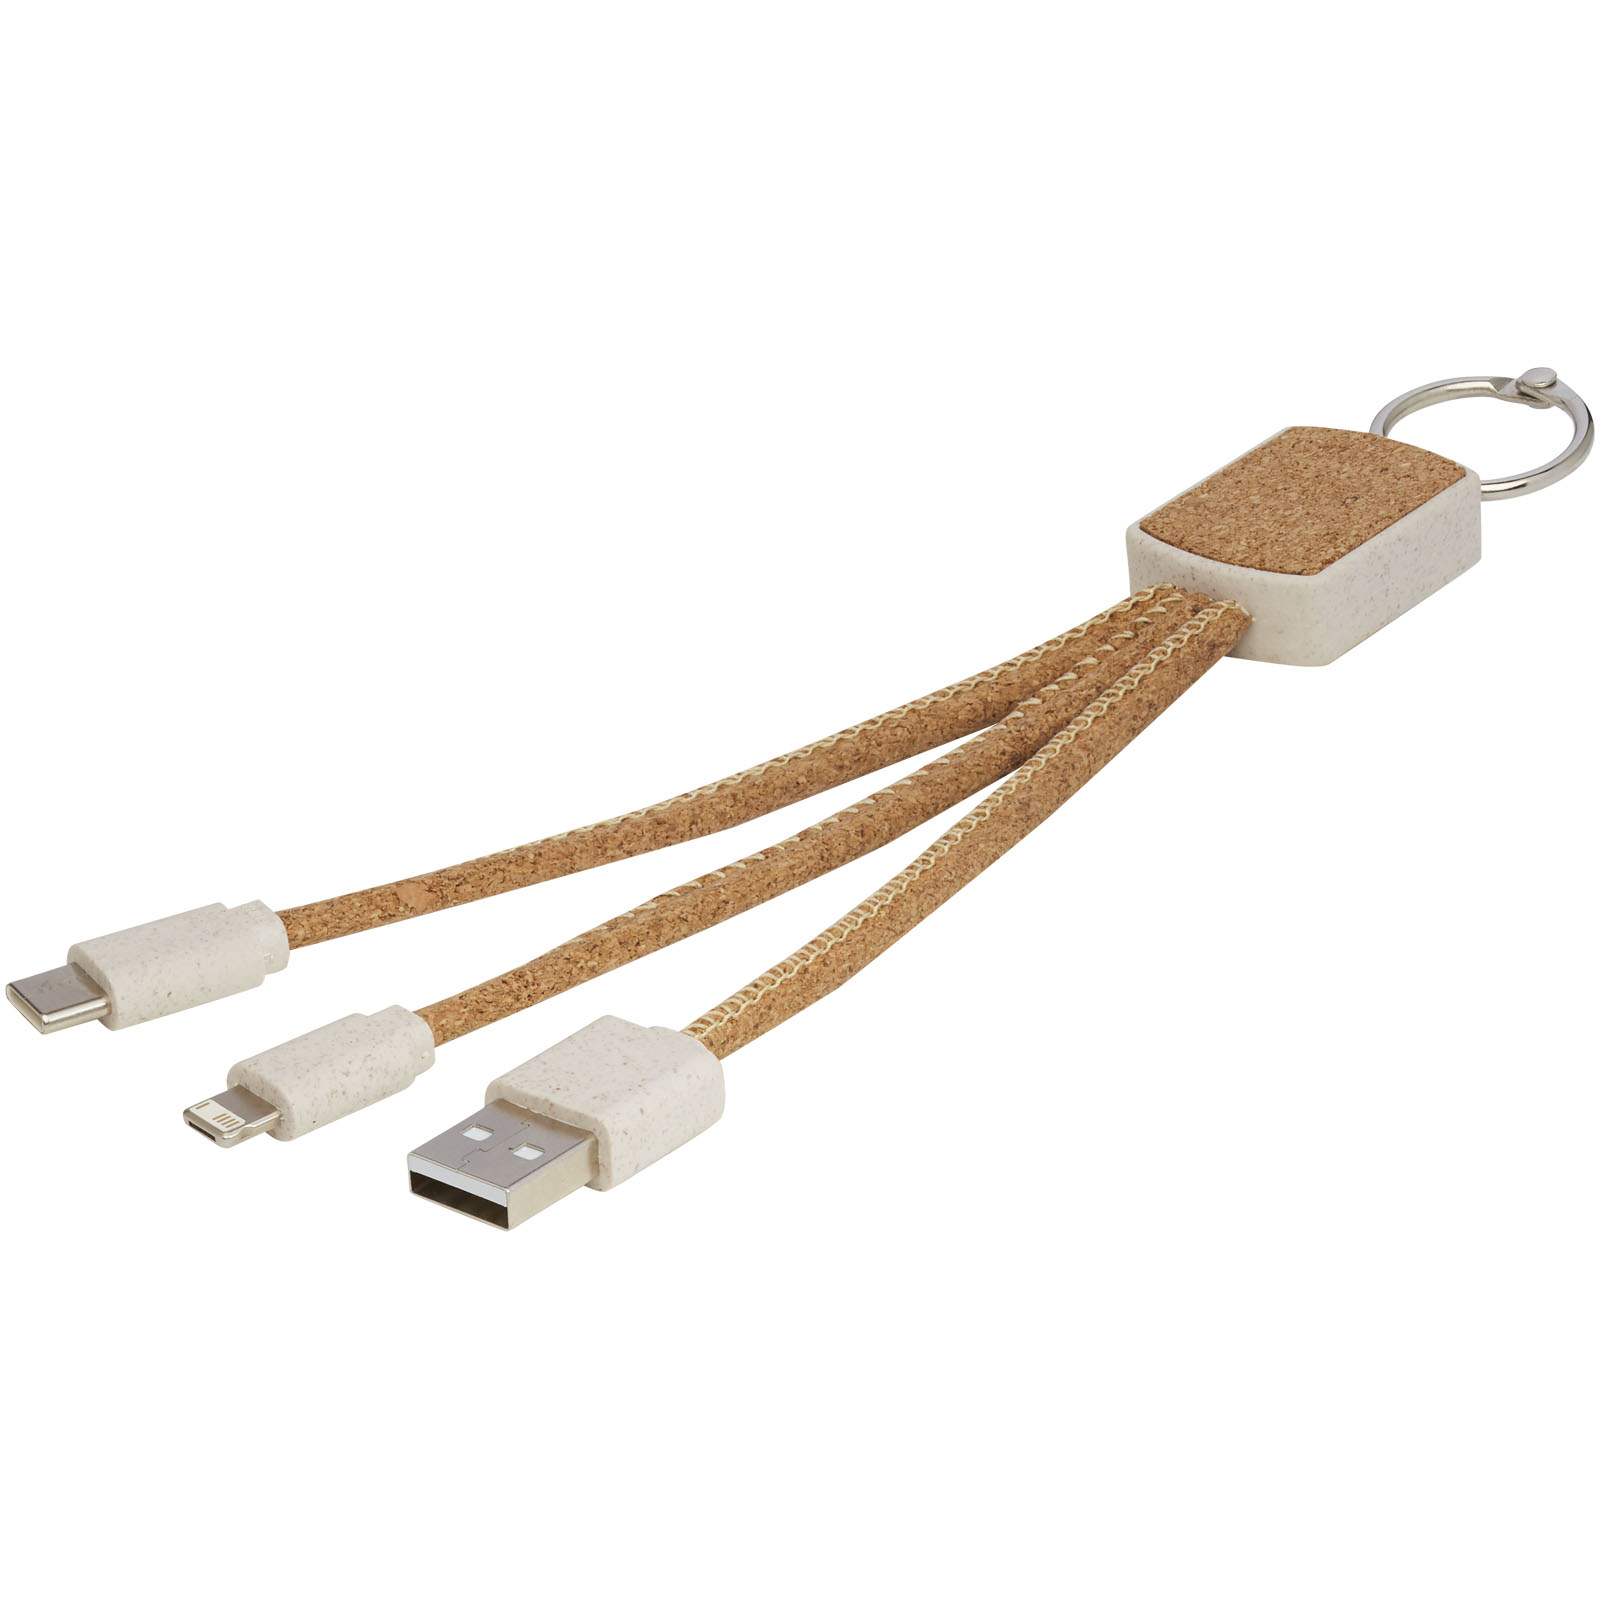 Advertising Cables - Bates wheat straw and cork 3-in-1 charging cable - 0